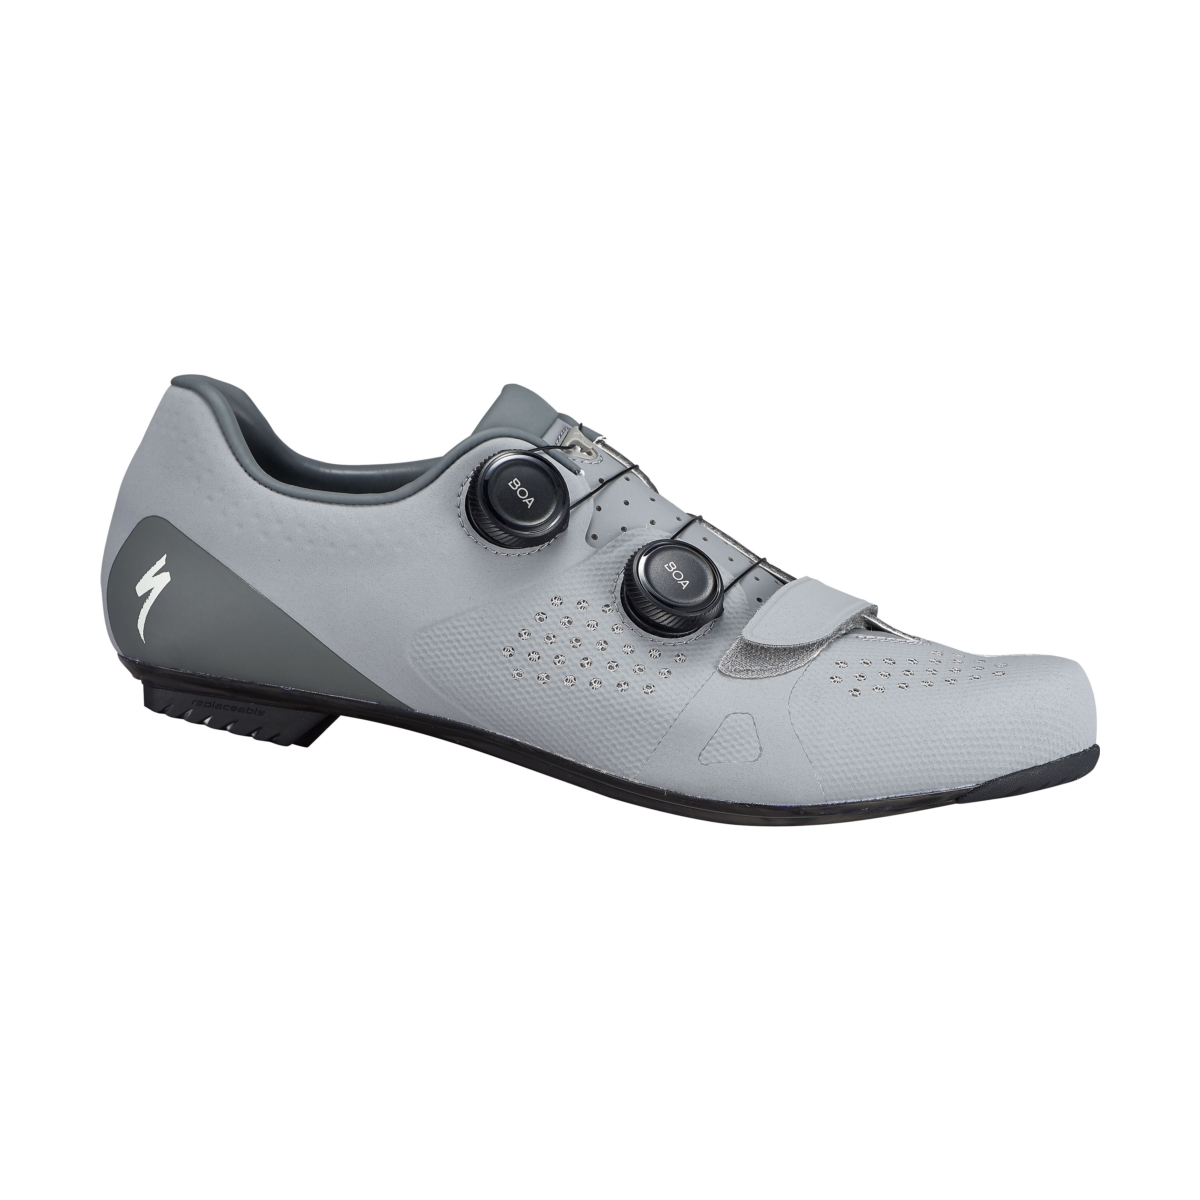 Buty Rowerowe SPECIALIZED Torch 3.0 - cool Grey